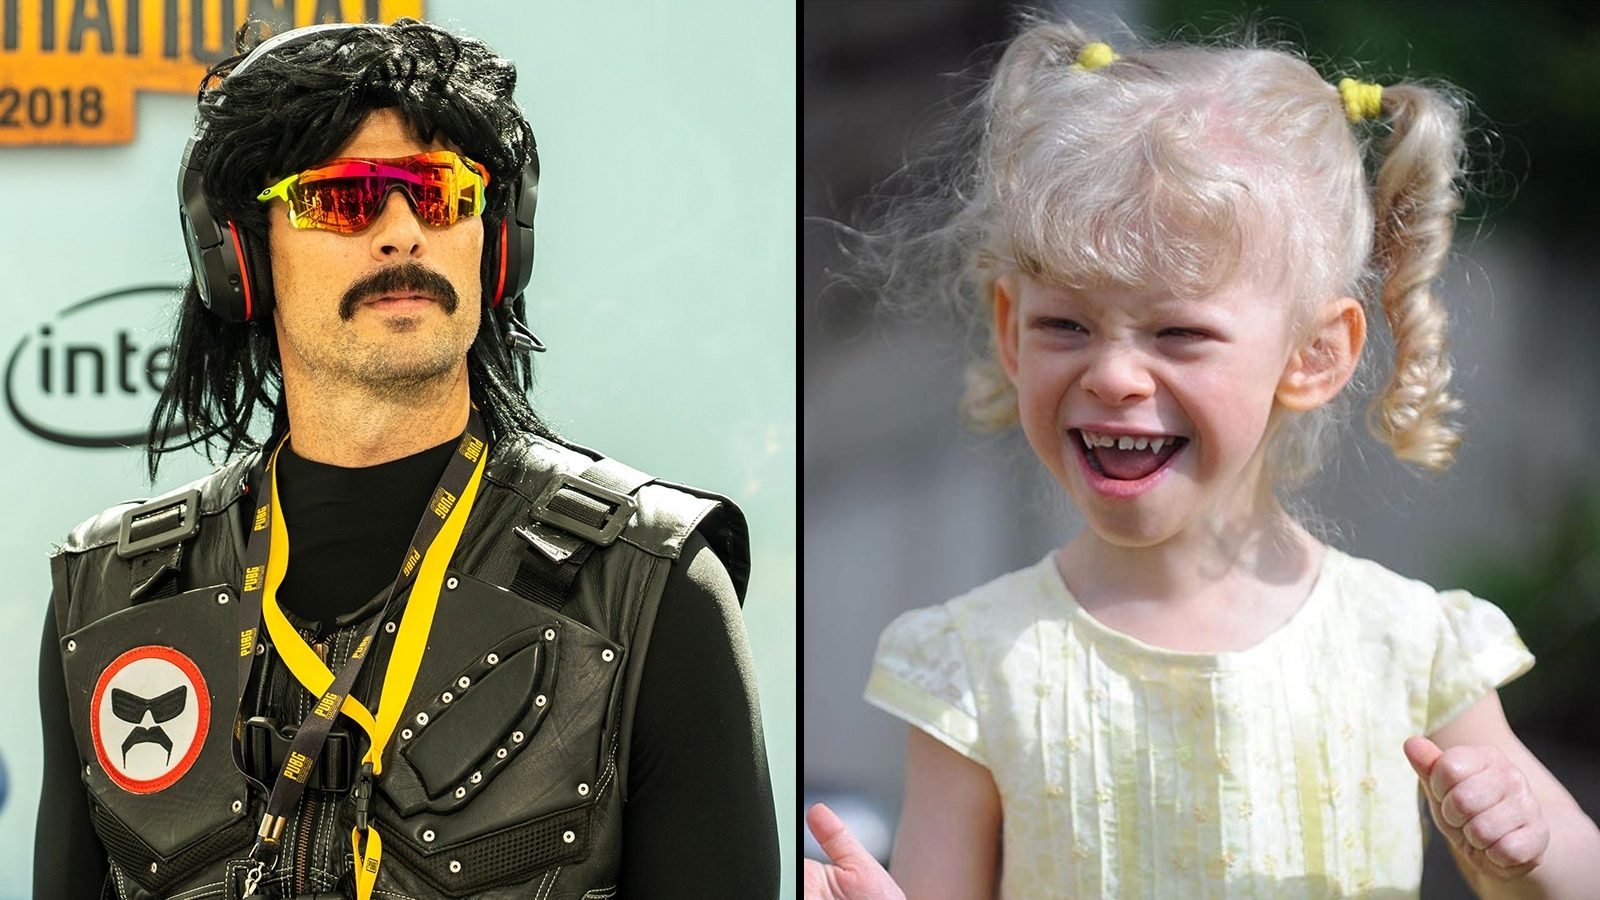 https://editors.dexerto.com/wp-content/uploads/thumbnails/_thumbnailLarge/dr-disrespect-owned-destroyed-by-small-child-little-girl-g-fuel-shaker-cup-the-doc.jpg